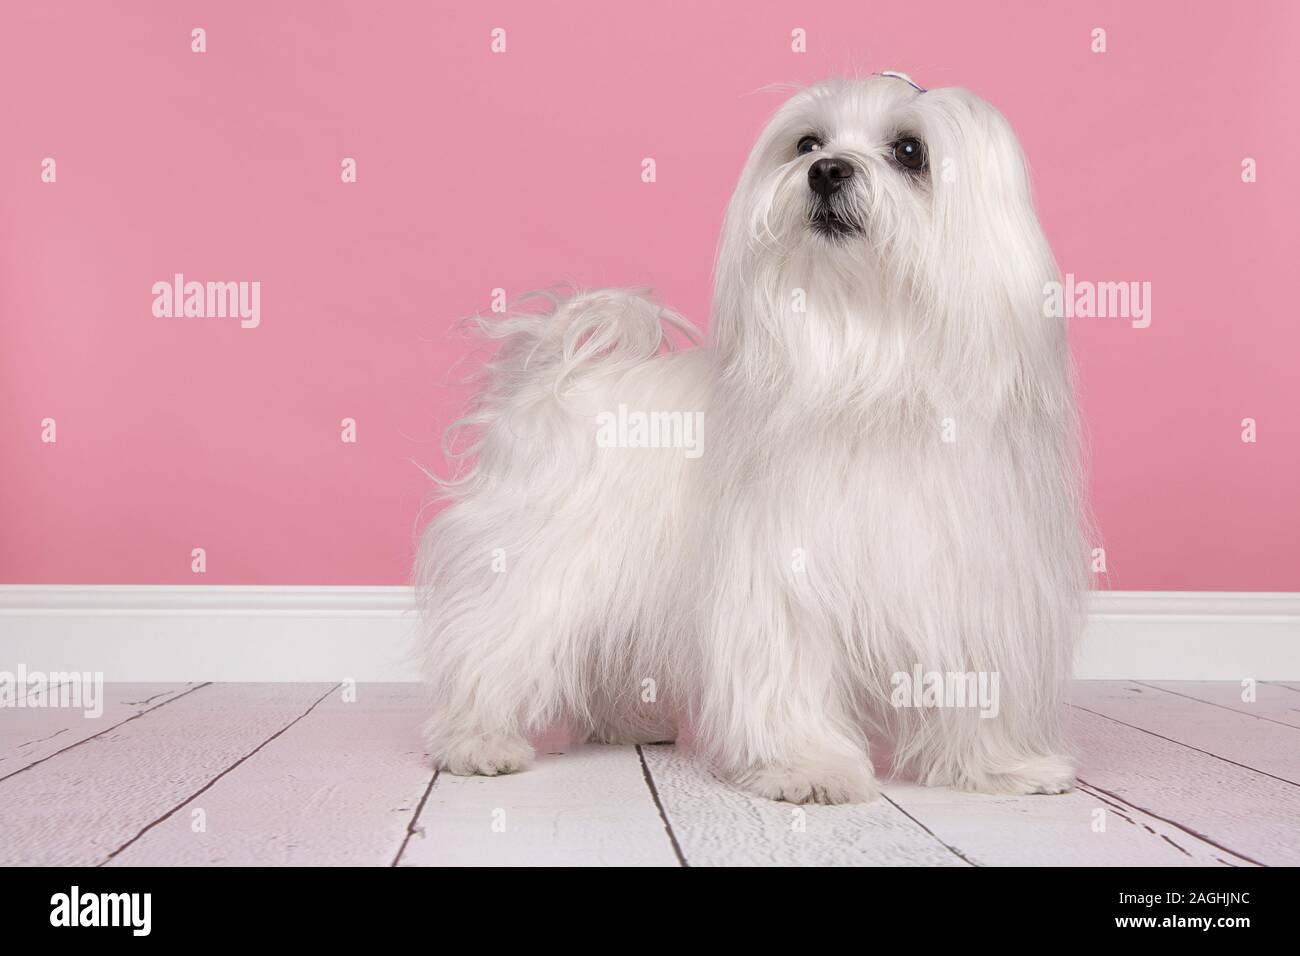 Pretty longhaired Maltese dog standing on a pink background Stock Photo